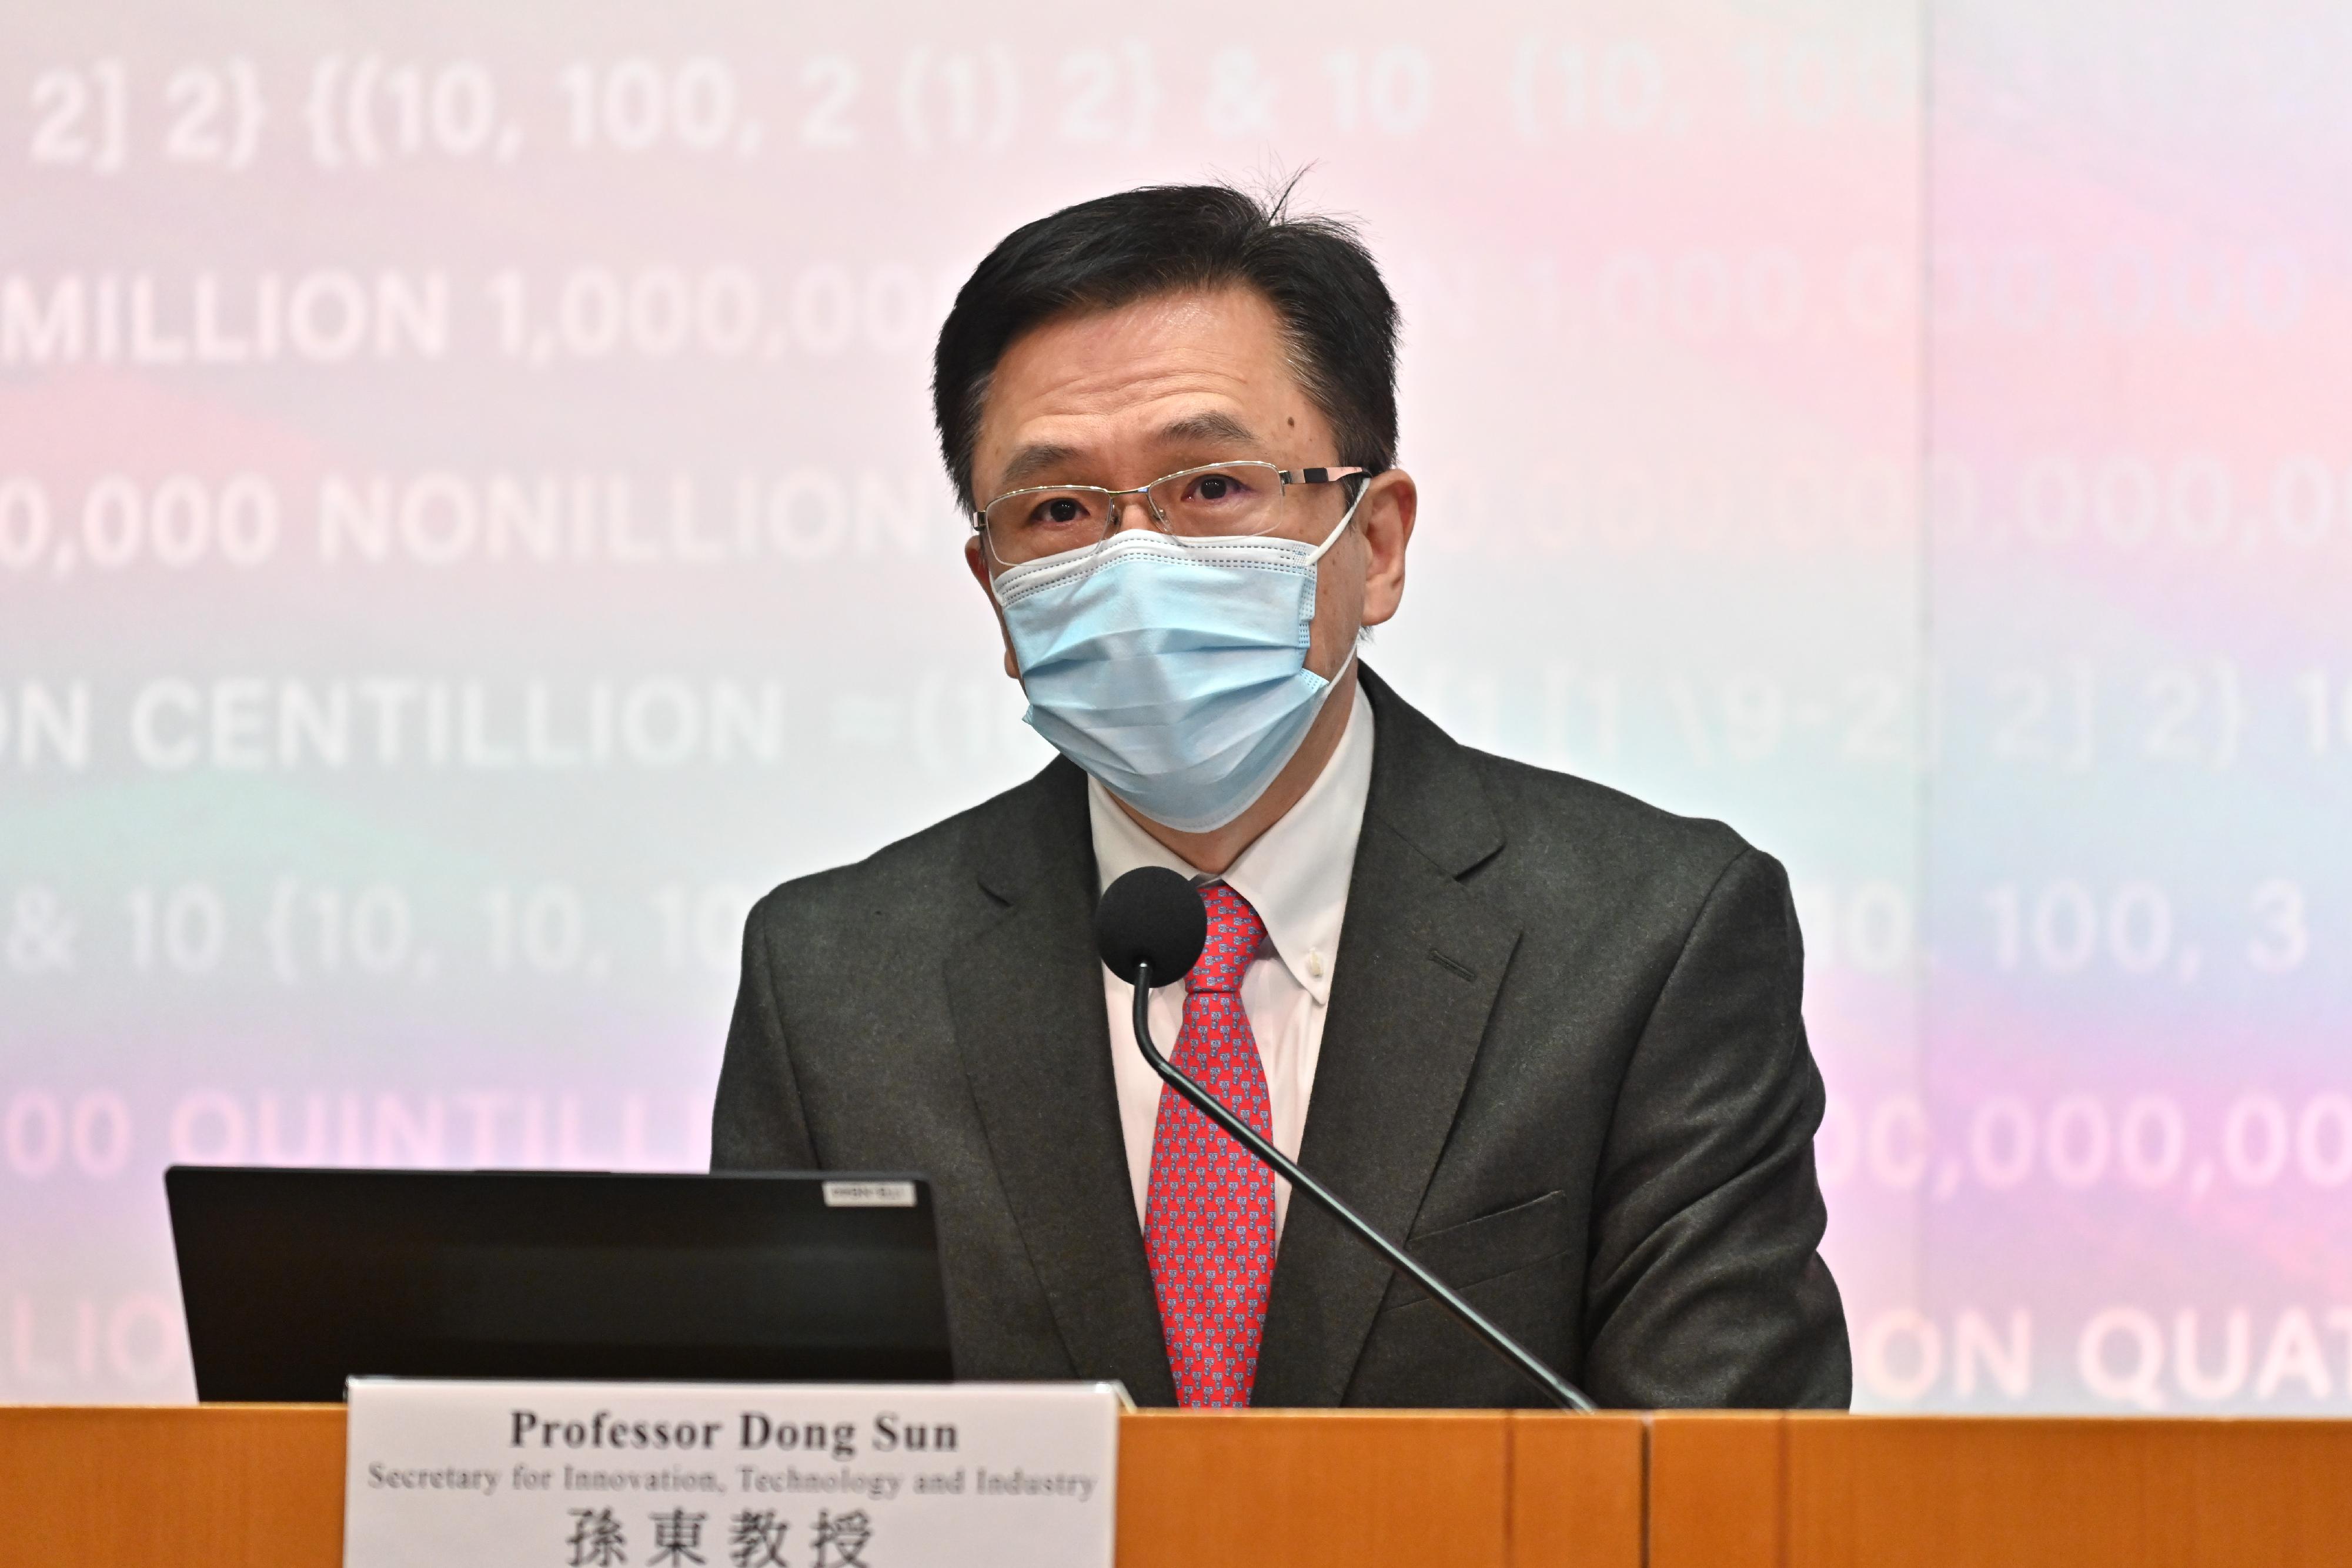 The Secretary for Innovation, Technology and Industry, Professor Sun Dong, unveils the Hong Kong Innovation and Technology Development Blueprint at a press conference today (December 22).